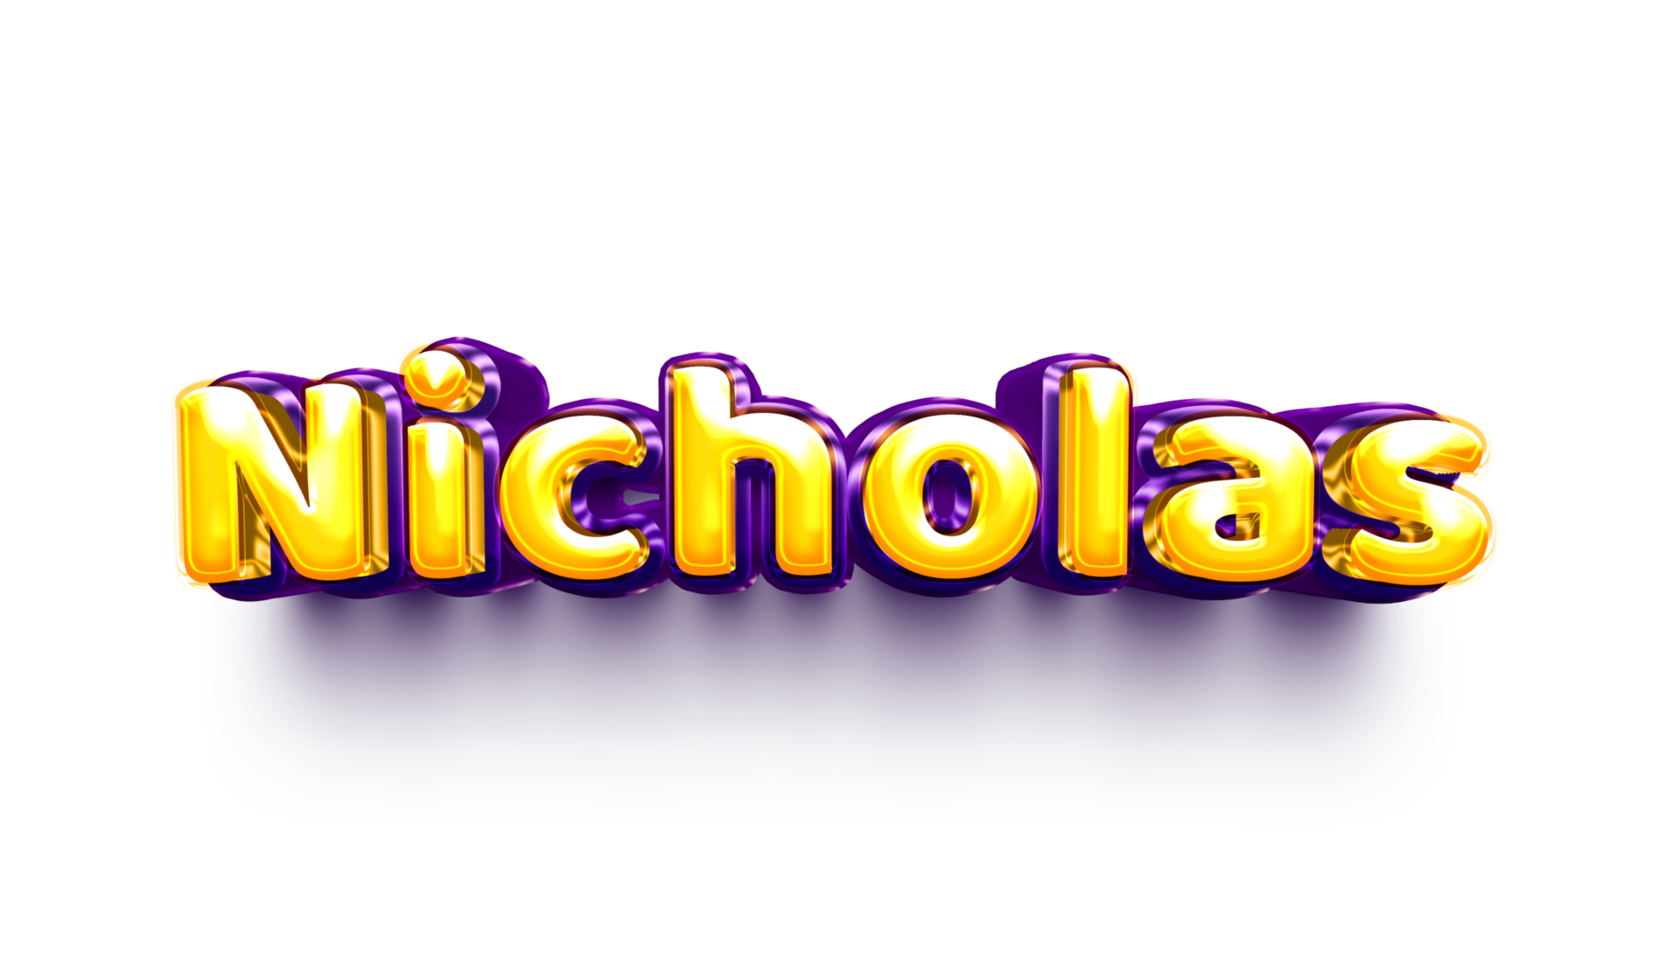 names of boy English helium balloon shiny celebration sticker 3d inflated Nicholas png